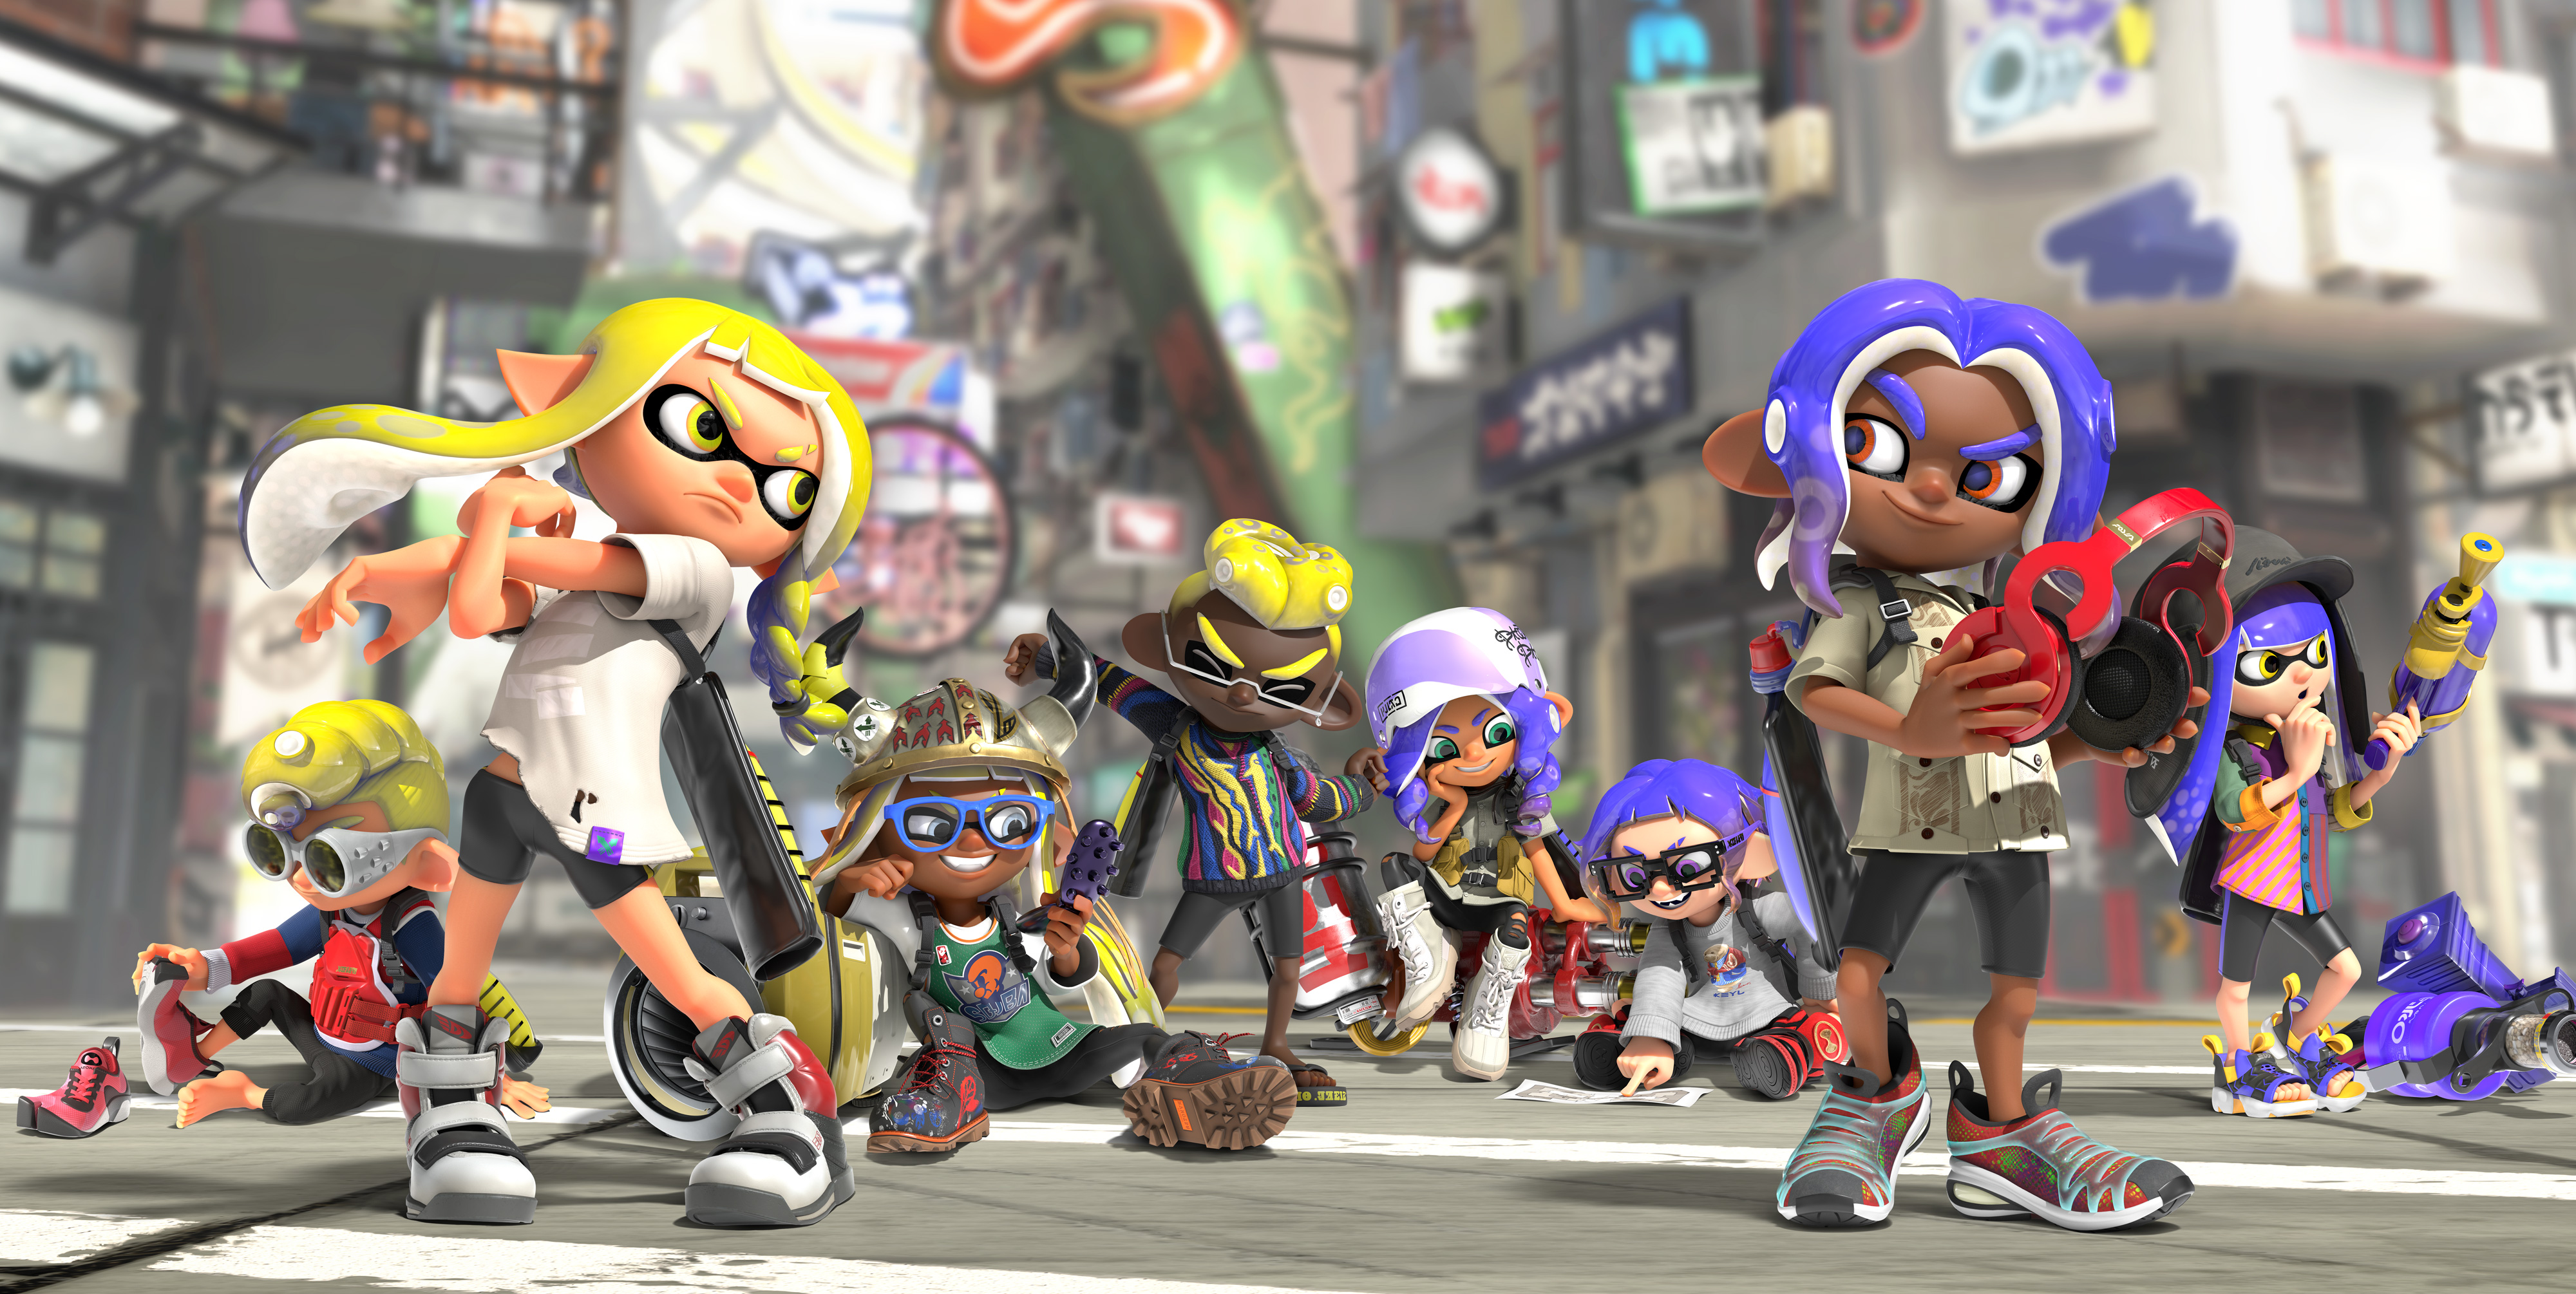 Inklings and Octolings face off in a city street in artwork from Splatoon 3